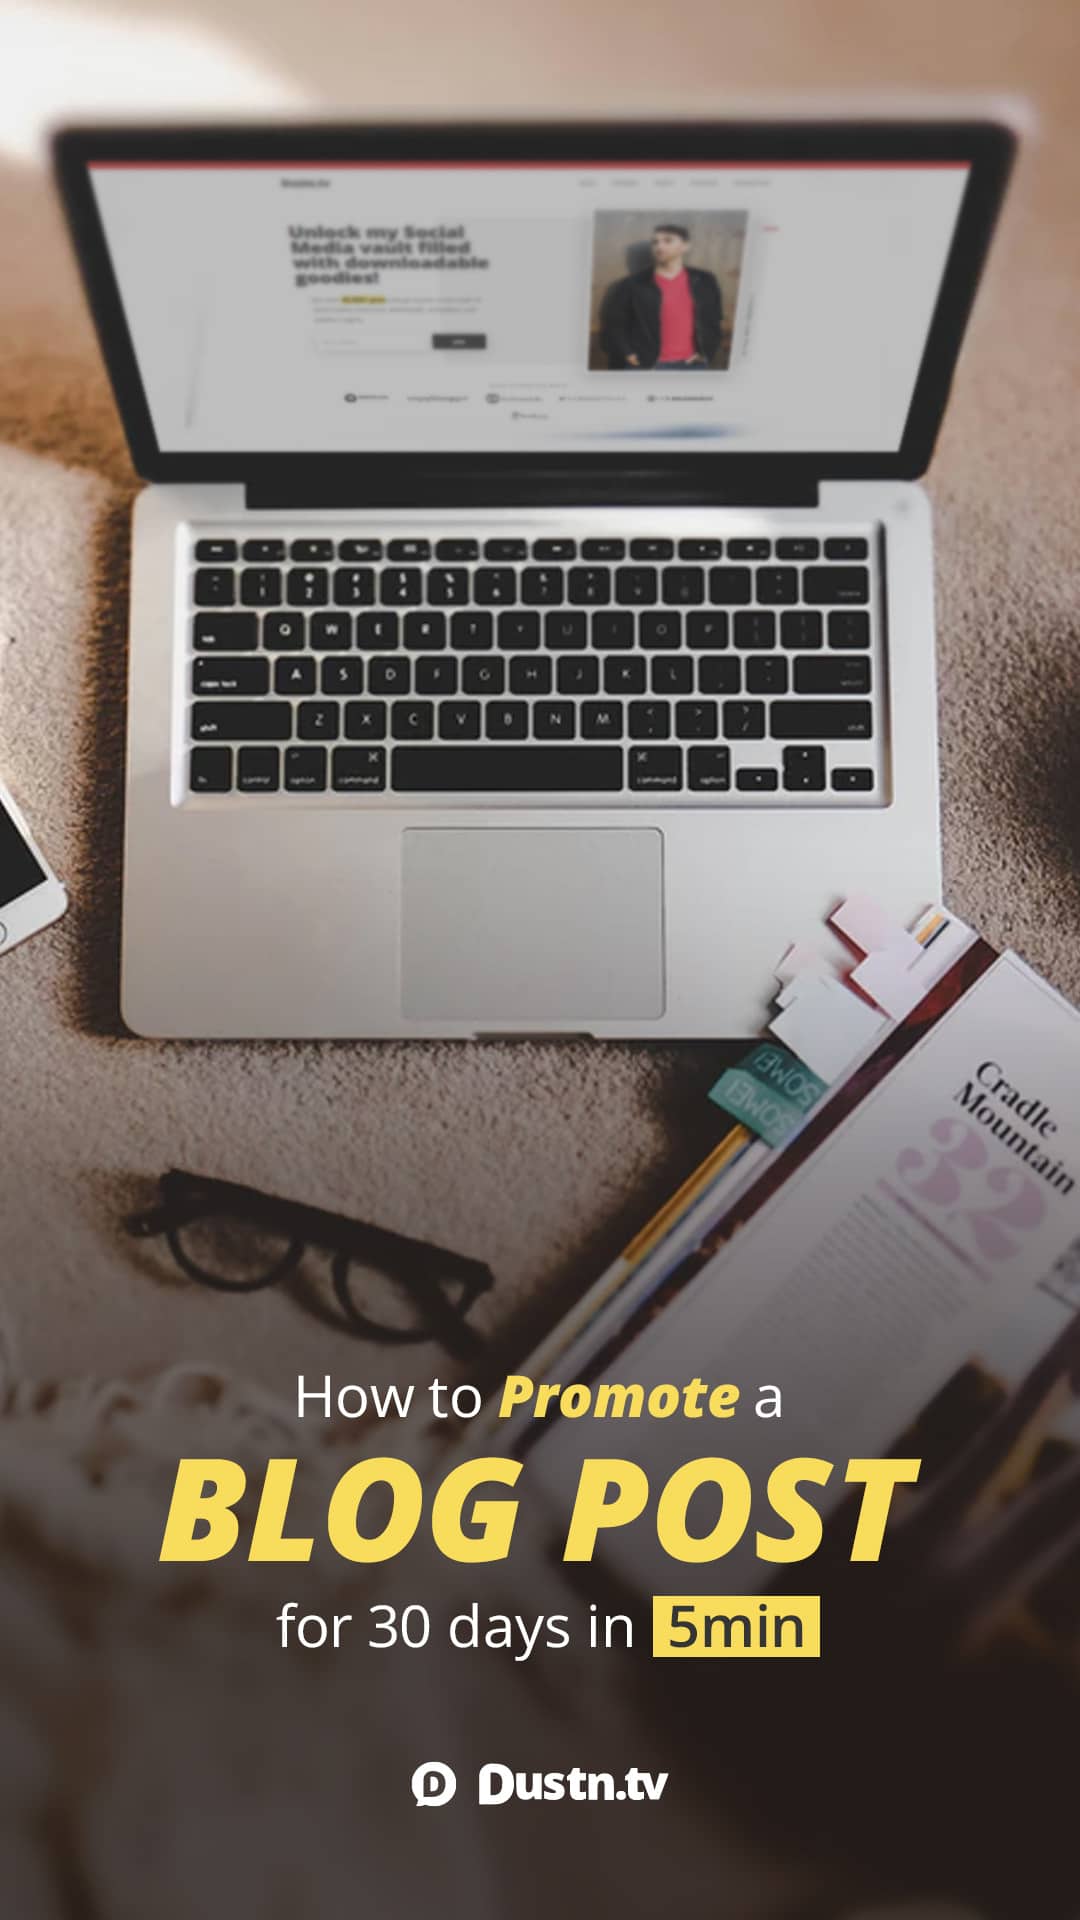 How to Promote an Epic Blog Post for 30 Days in 5min